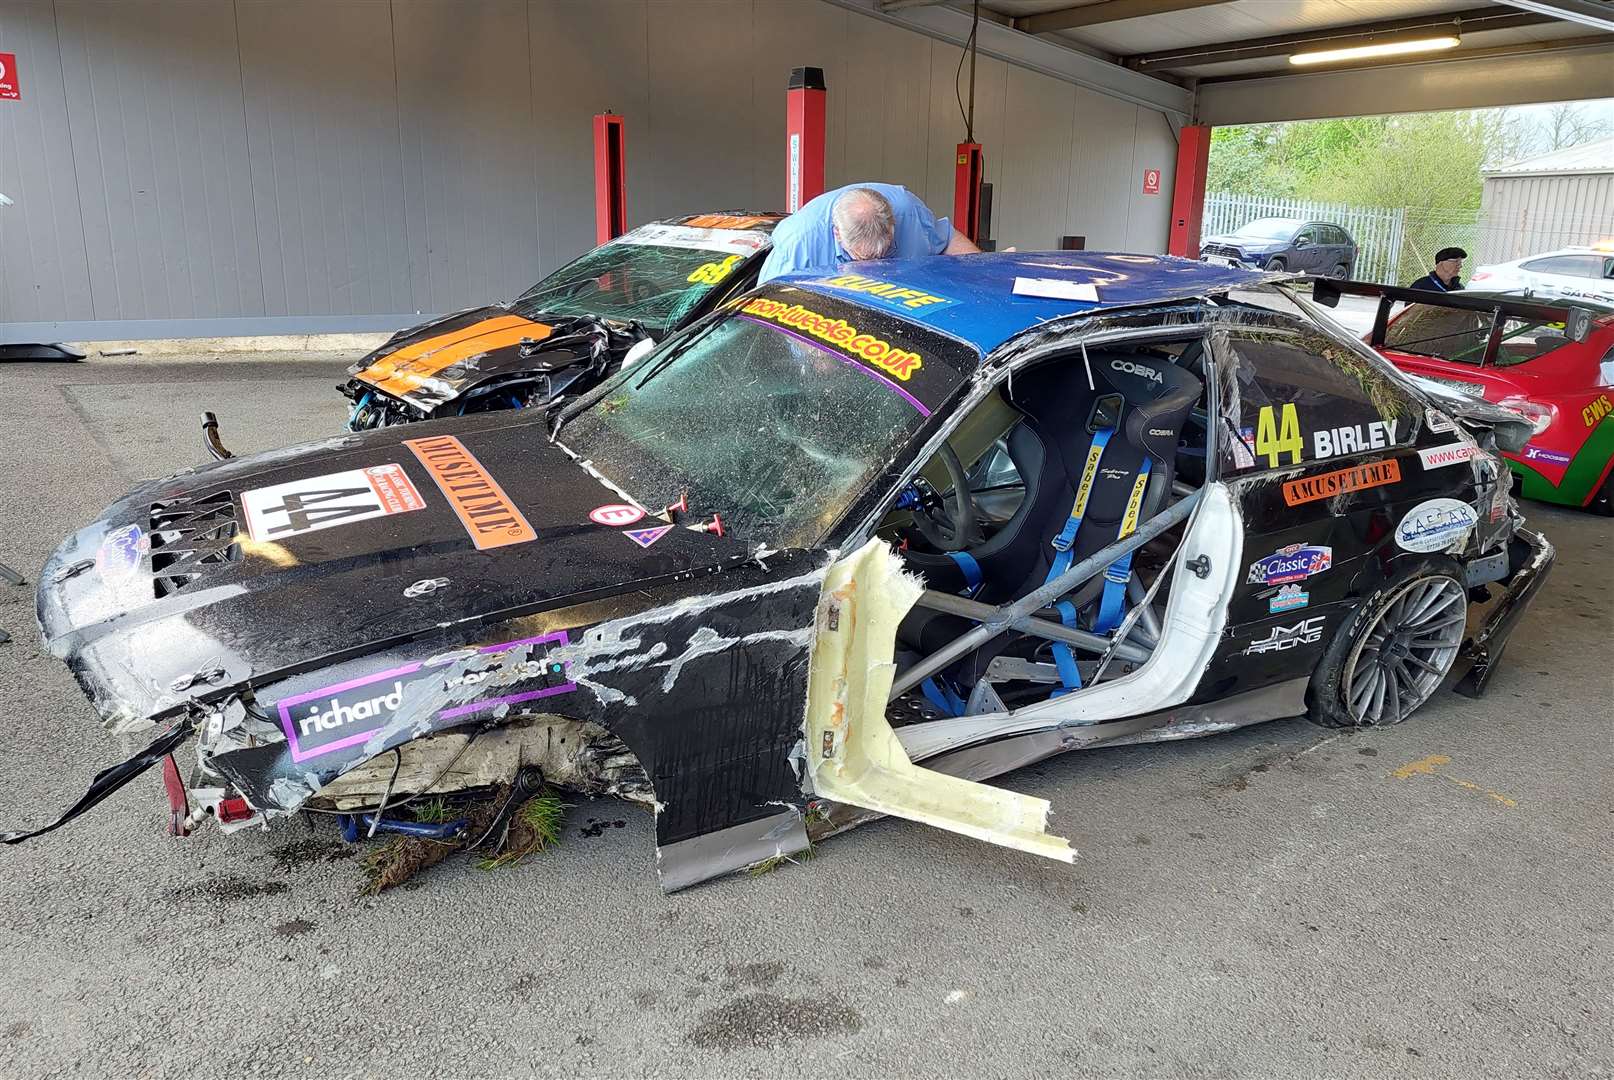 Rod Birley was involved in a huge crash at Brands Hatch on Sunday; the BMW E36 racer was leading the Classic and Modern Motorsport Club's Super Saloons when the incident happened